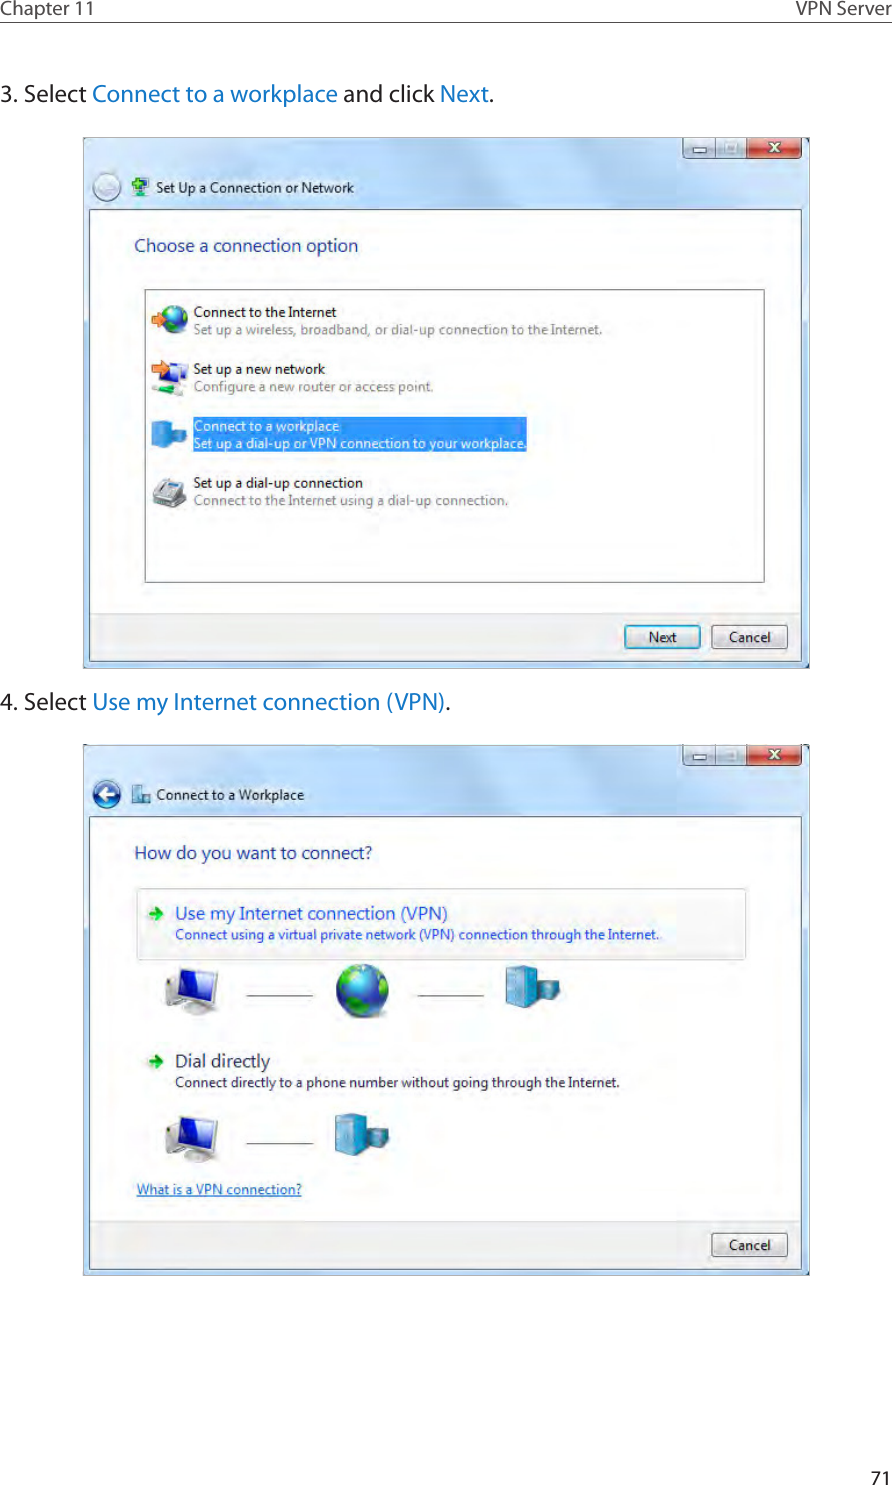 71Chapter 11 VPN Server3. Select Connect to a workplace and click Next.4. Select Use my Internet connection (VPN).